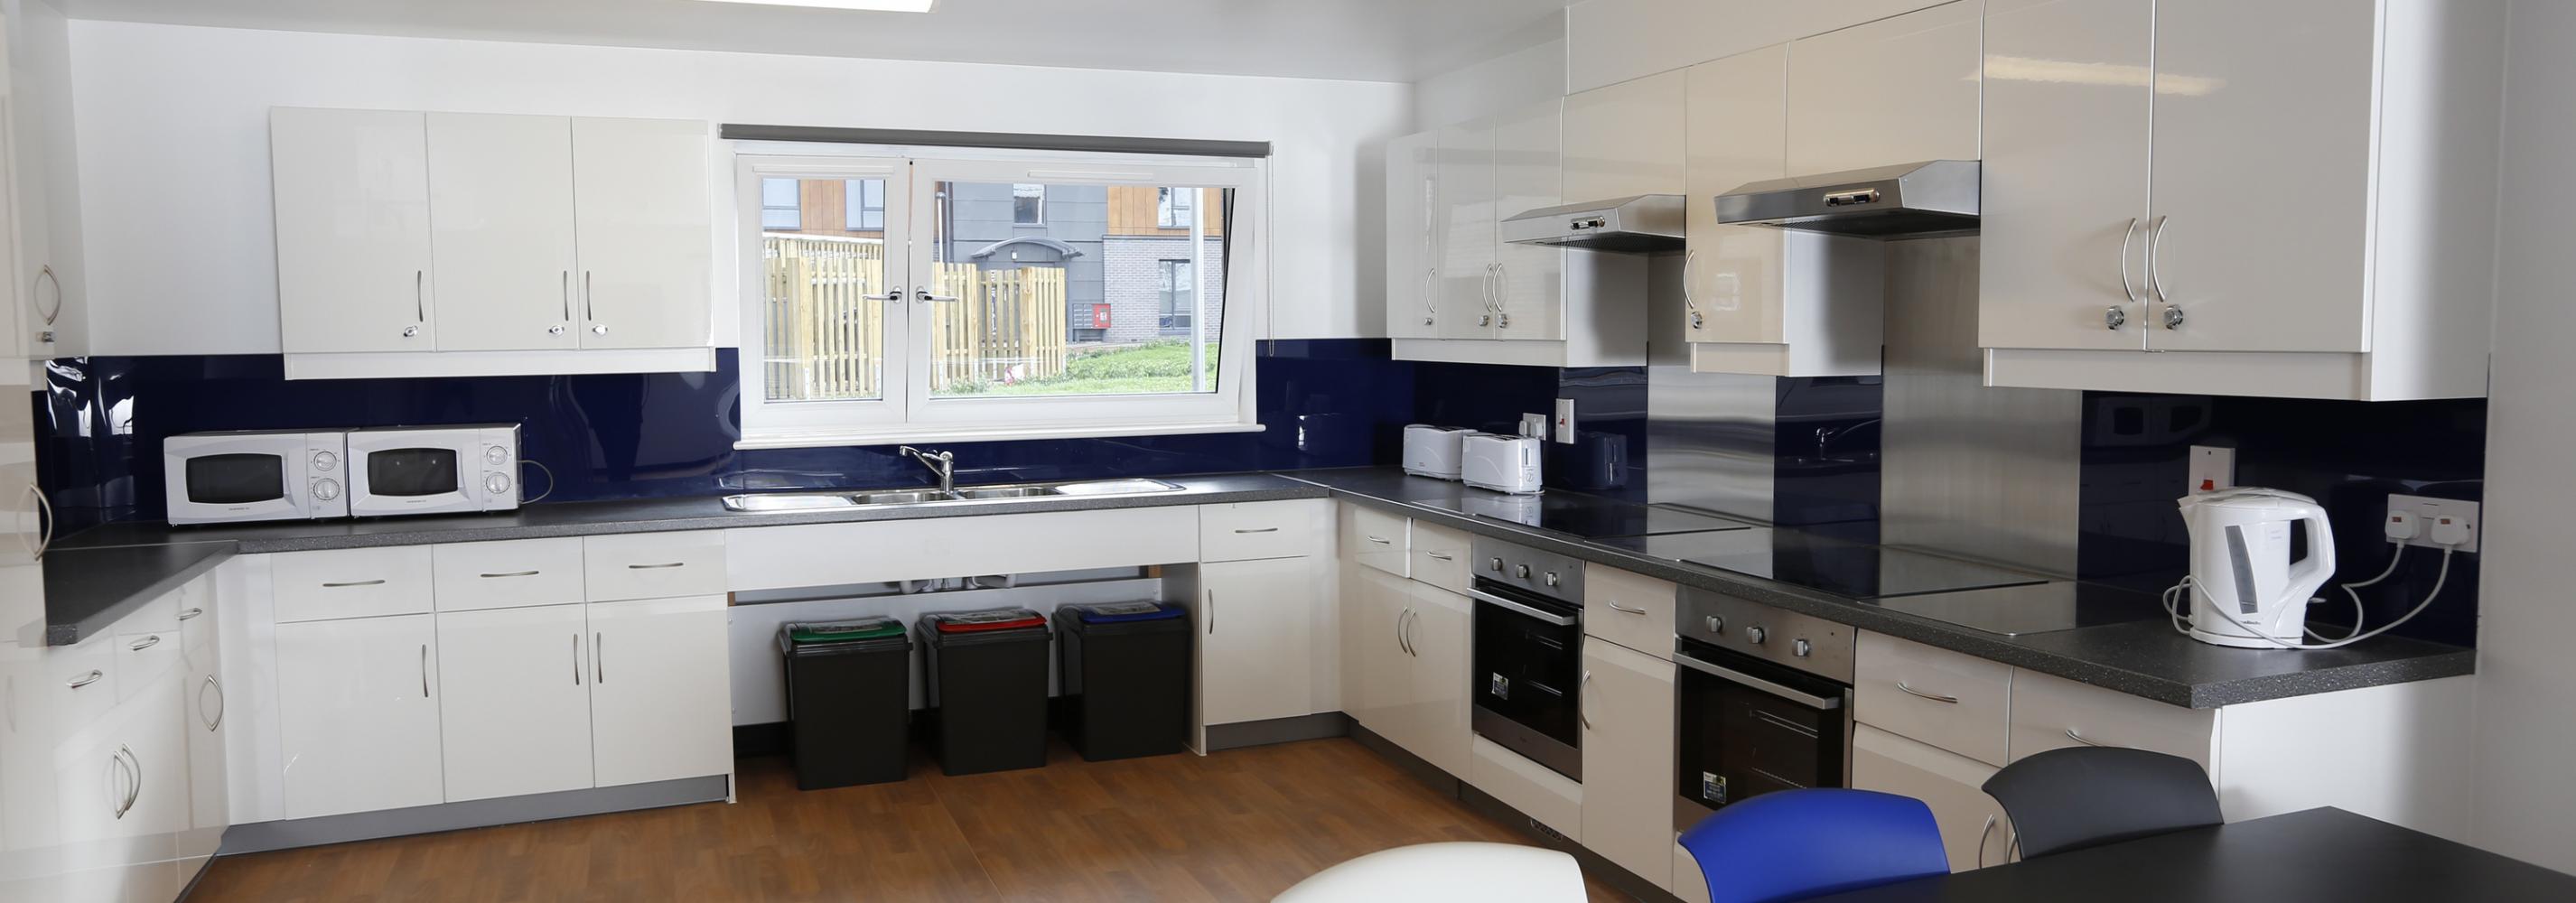 Townhouse kitchen with two ovens, two induction cookers, two microwaves, two toasters, a kettle and lockable storage space